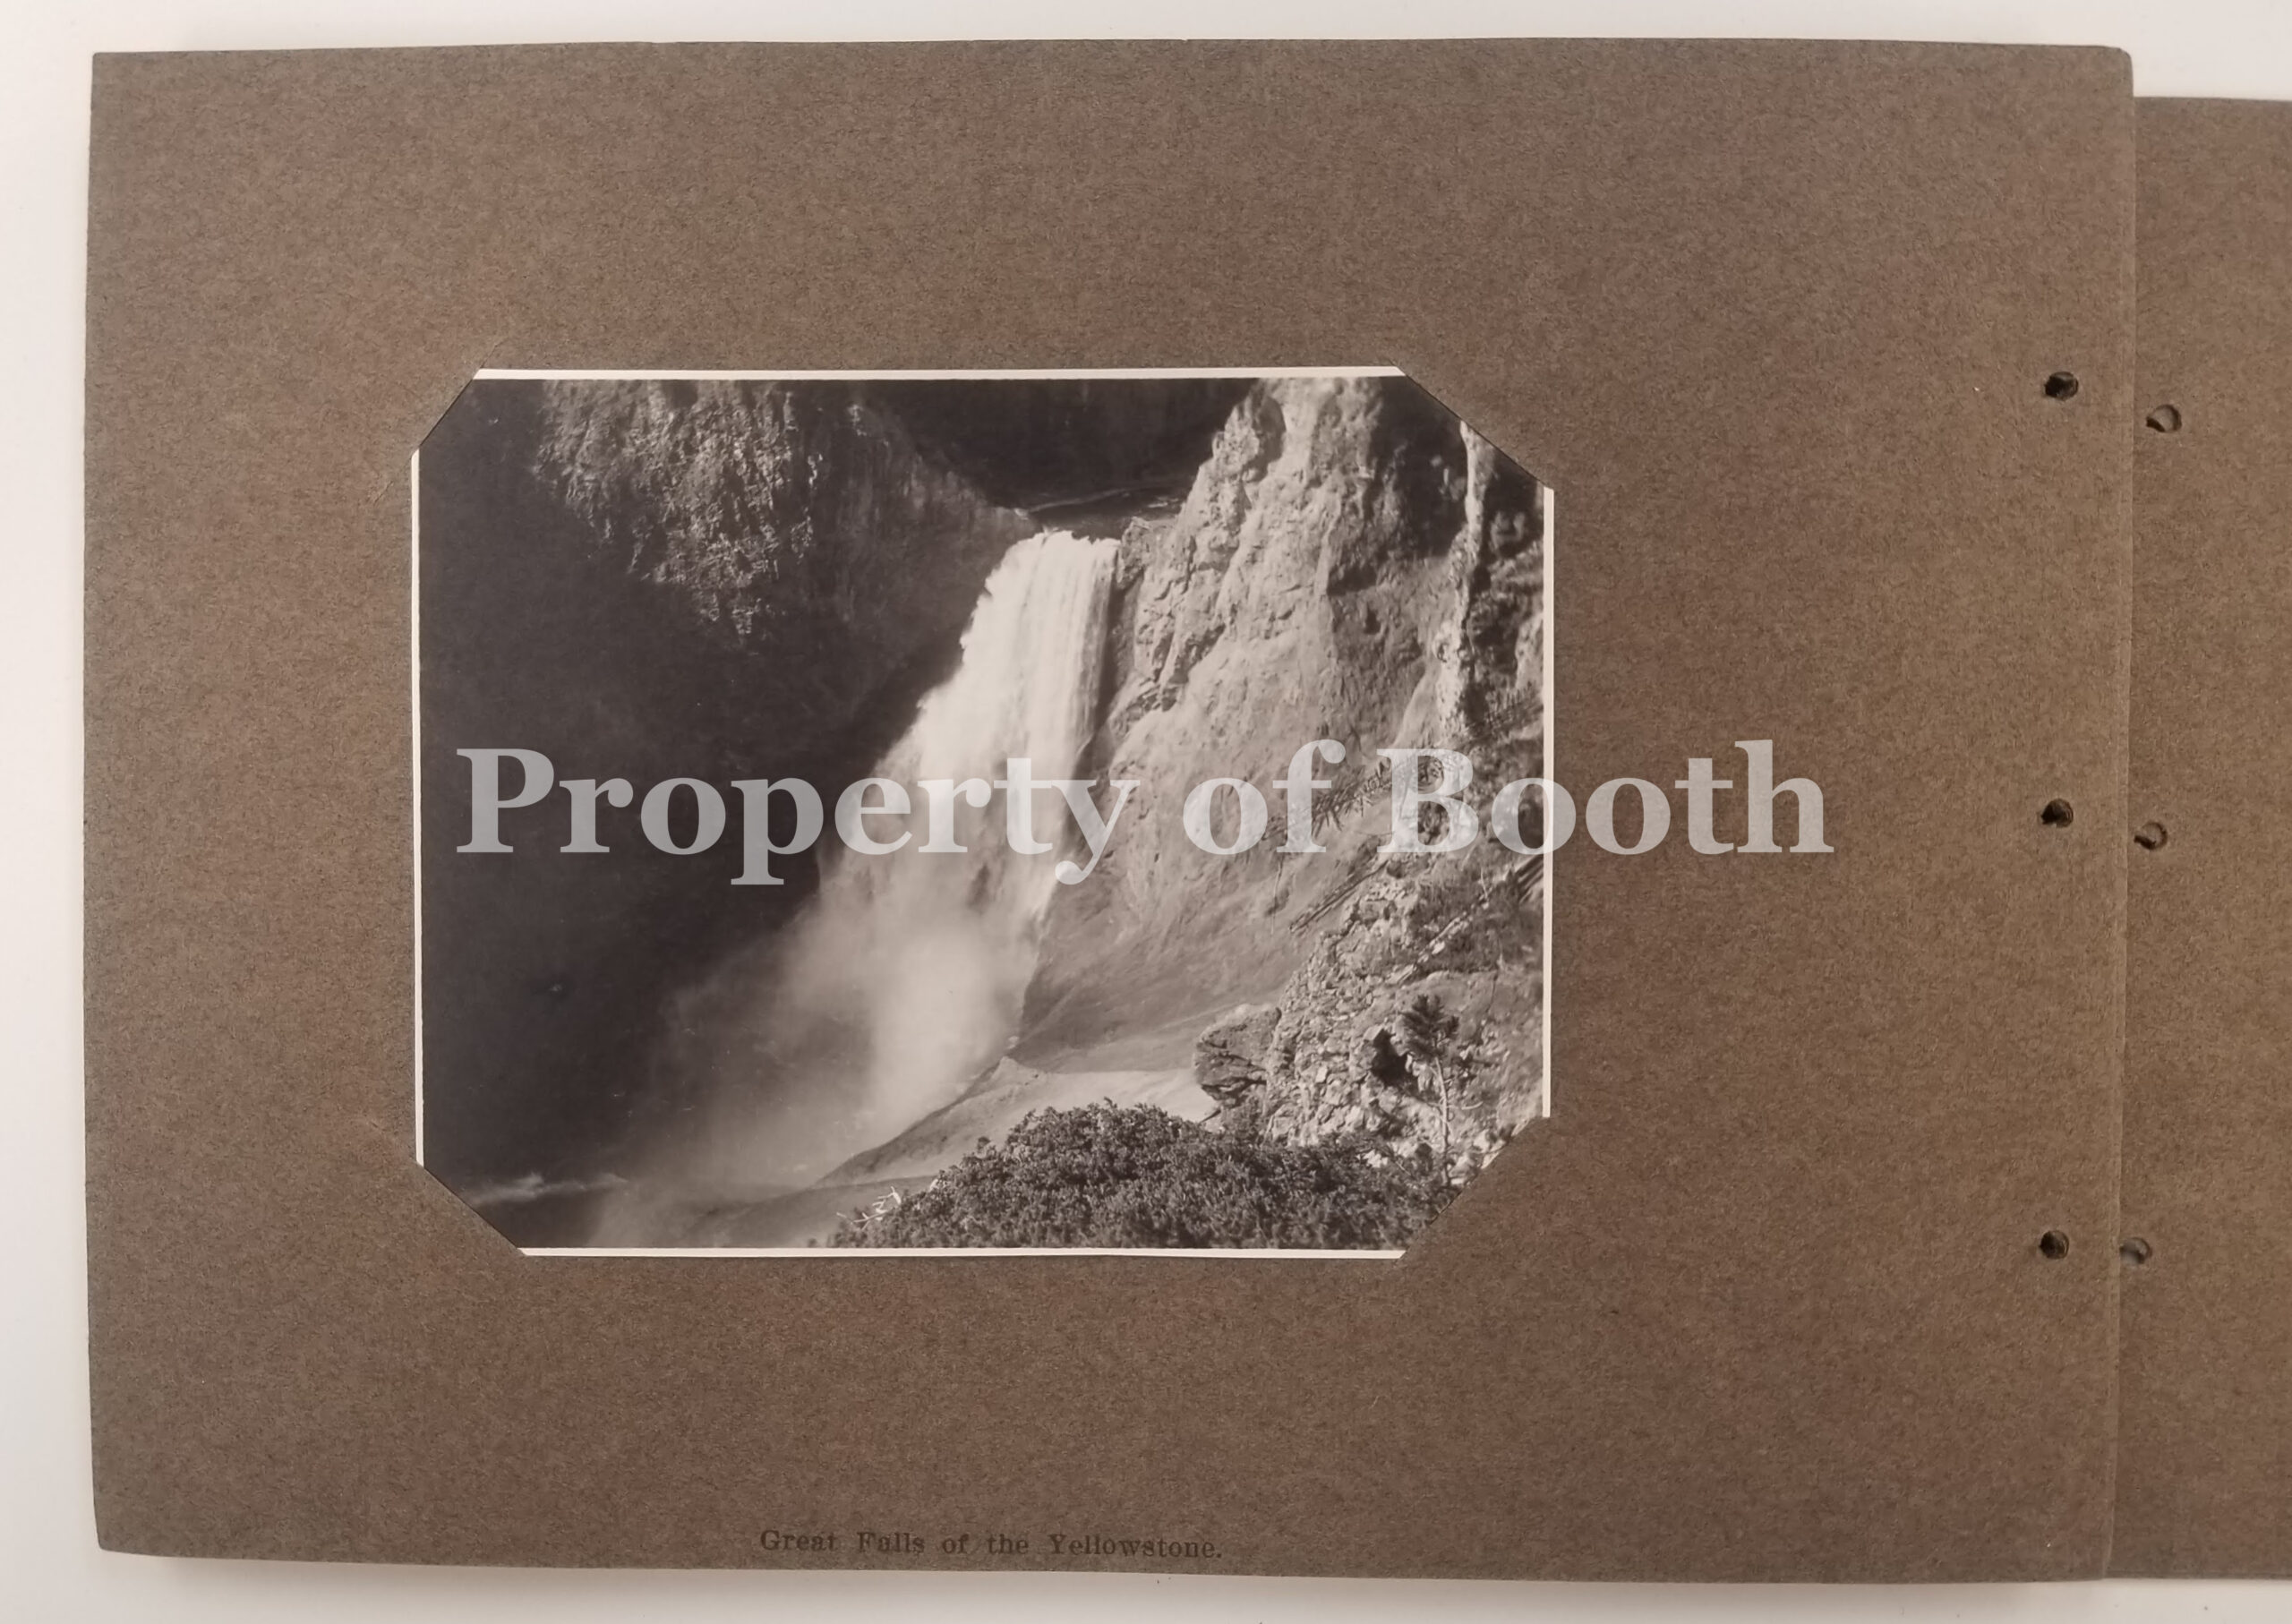 © Frank Jay Haynes, [no #] Great Falls of the Yellowstone (different Photo than #4165), 1883, Silver Print, 3.5 x 4.5". 